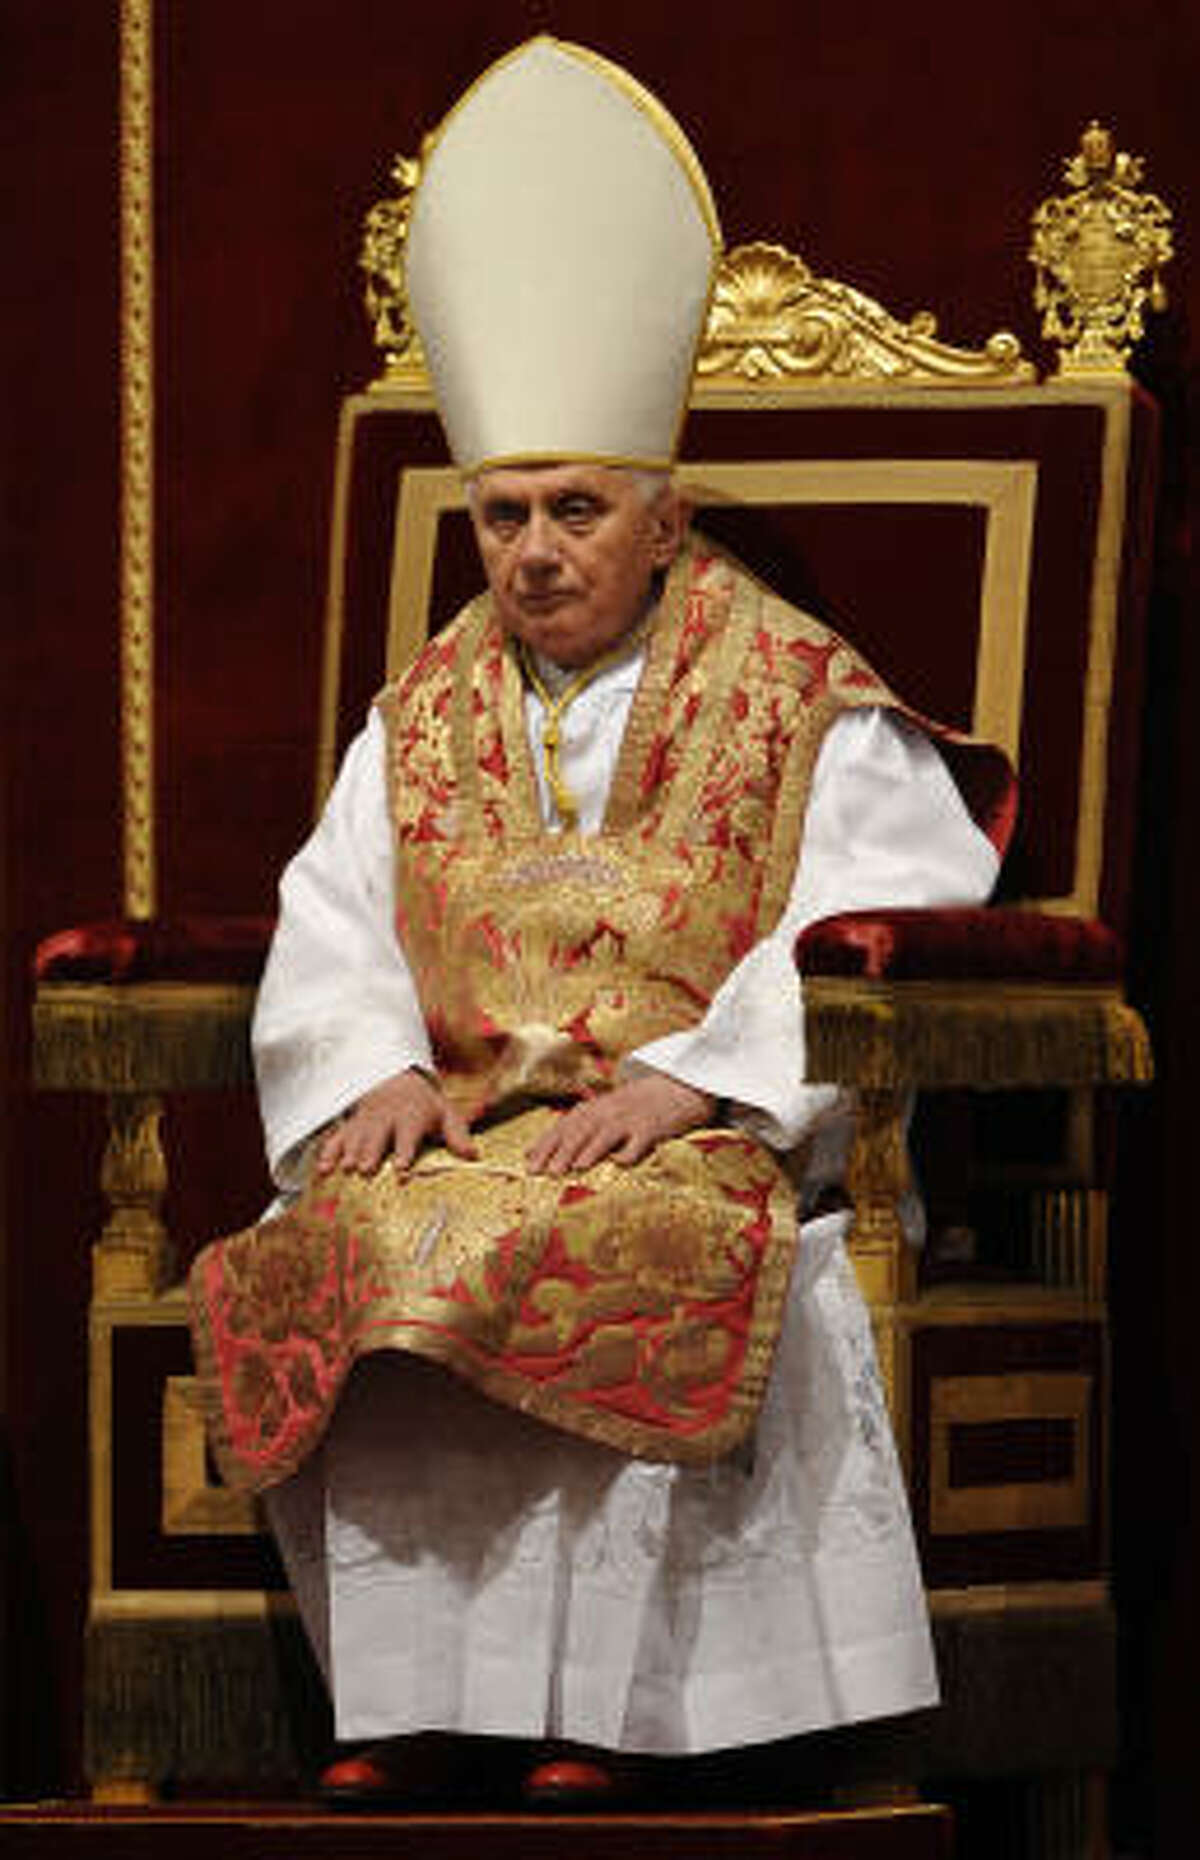 Pope Benedict XVI, wearing an embroidered fiddleback chasuble, presides over the Good Friday service in Saint Peter's basilica at the Vatican in March.